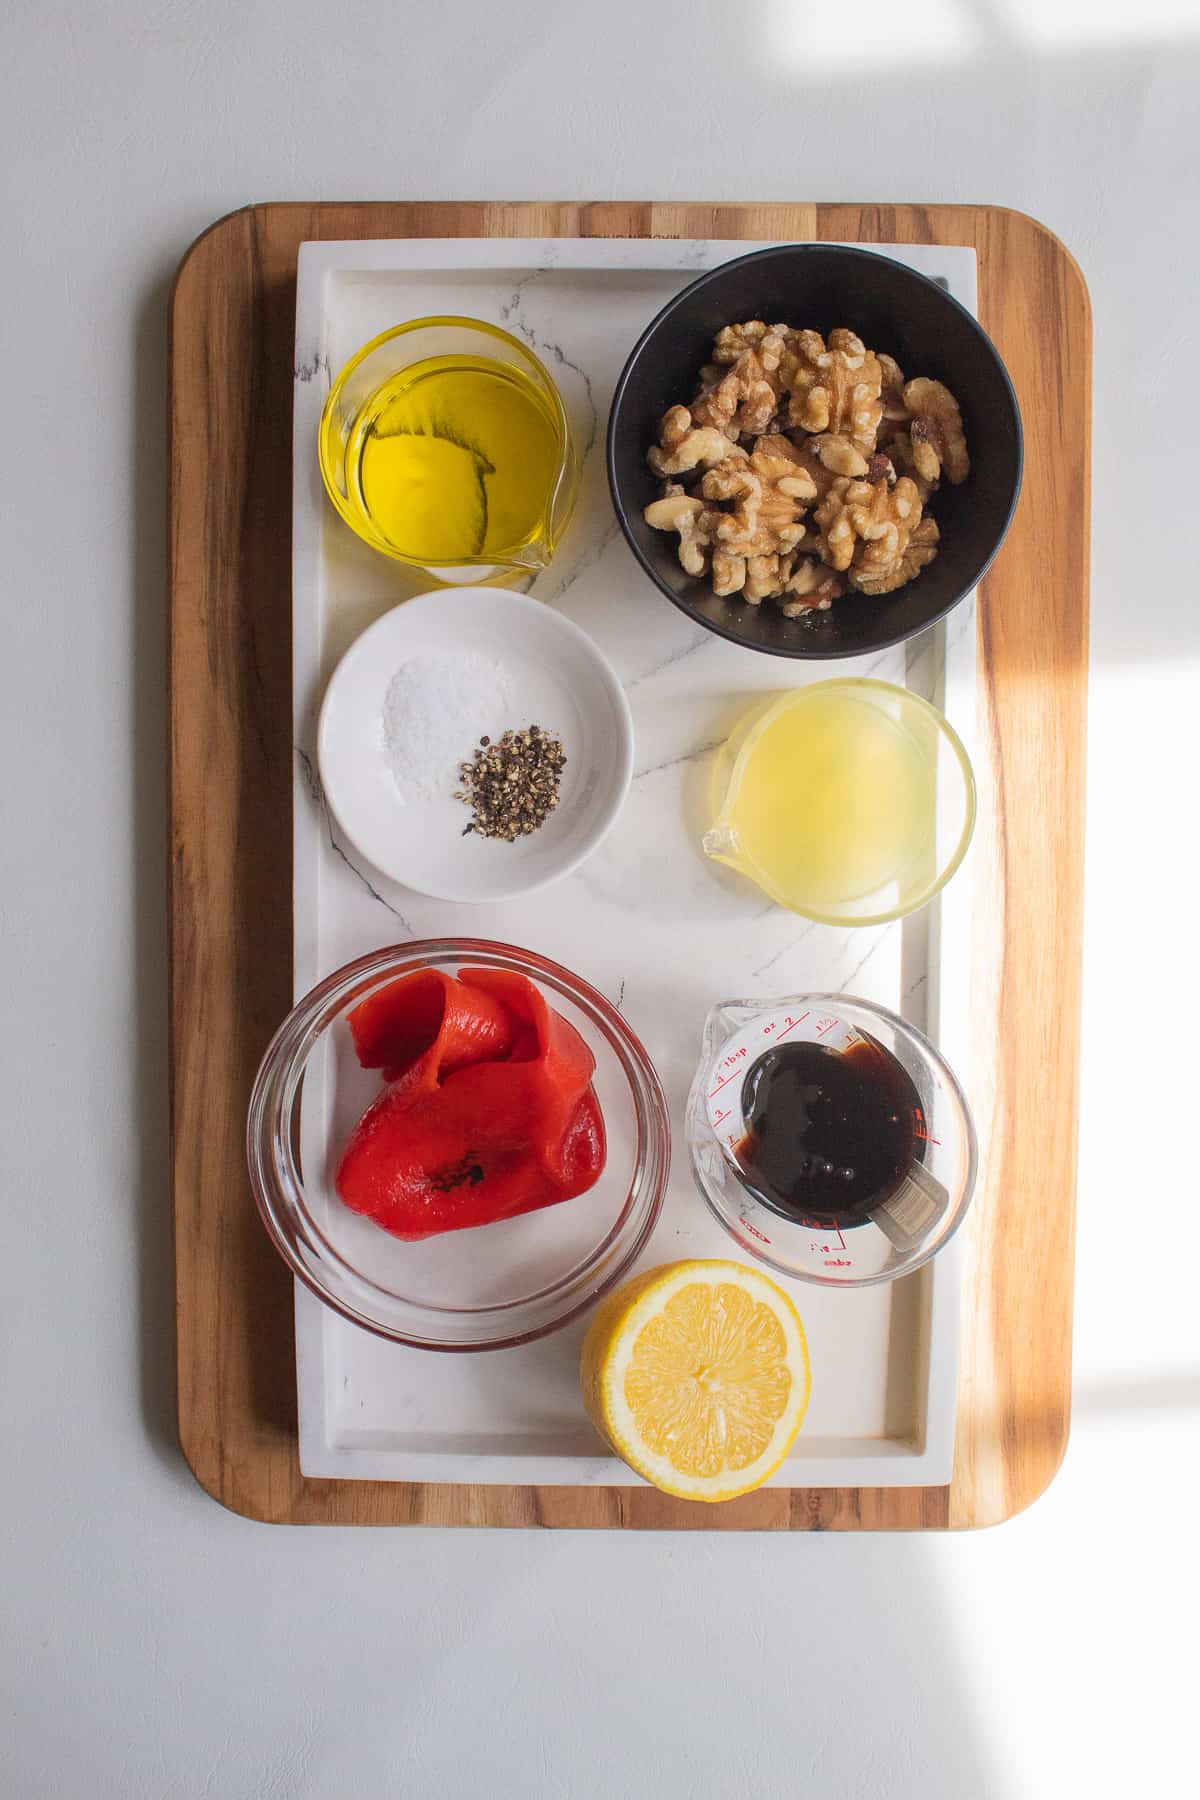 Ingredients for the salad dressing are arranged in small bowls on a white tray.